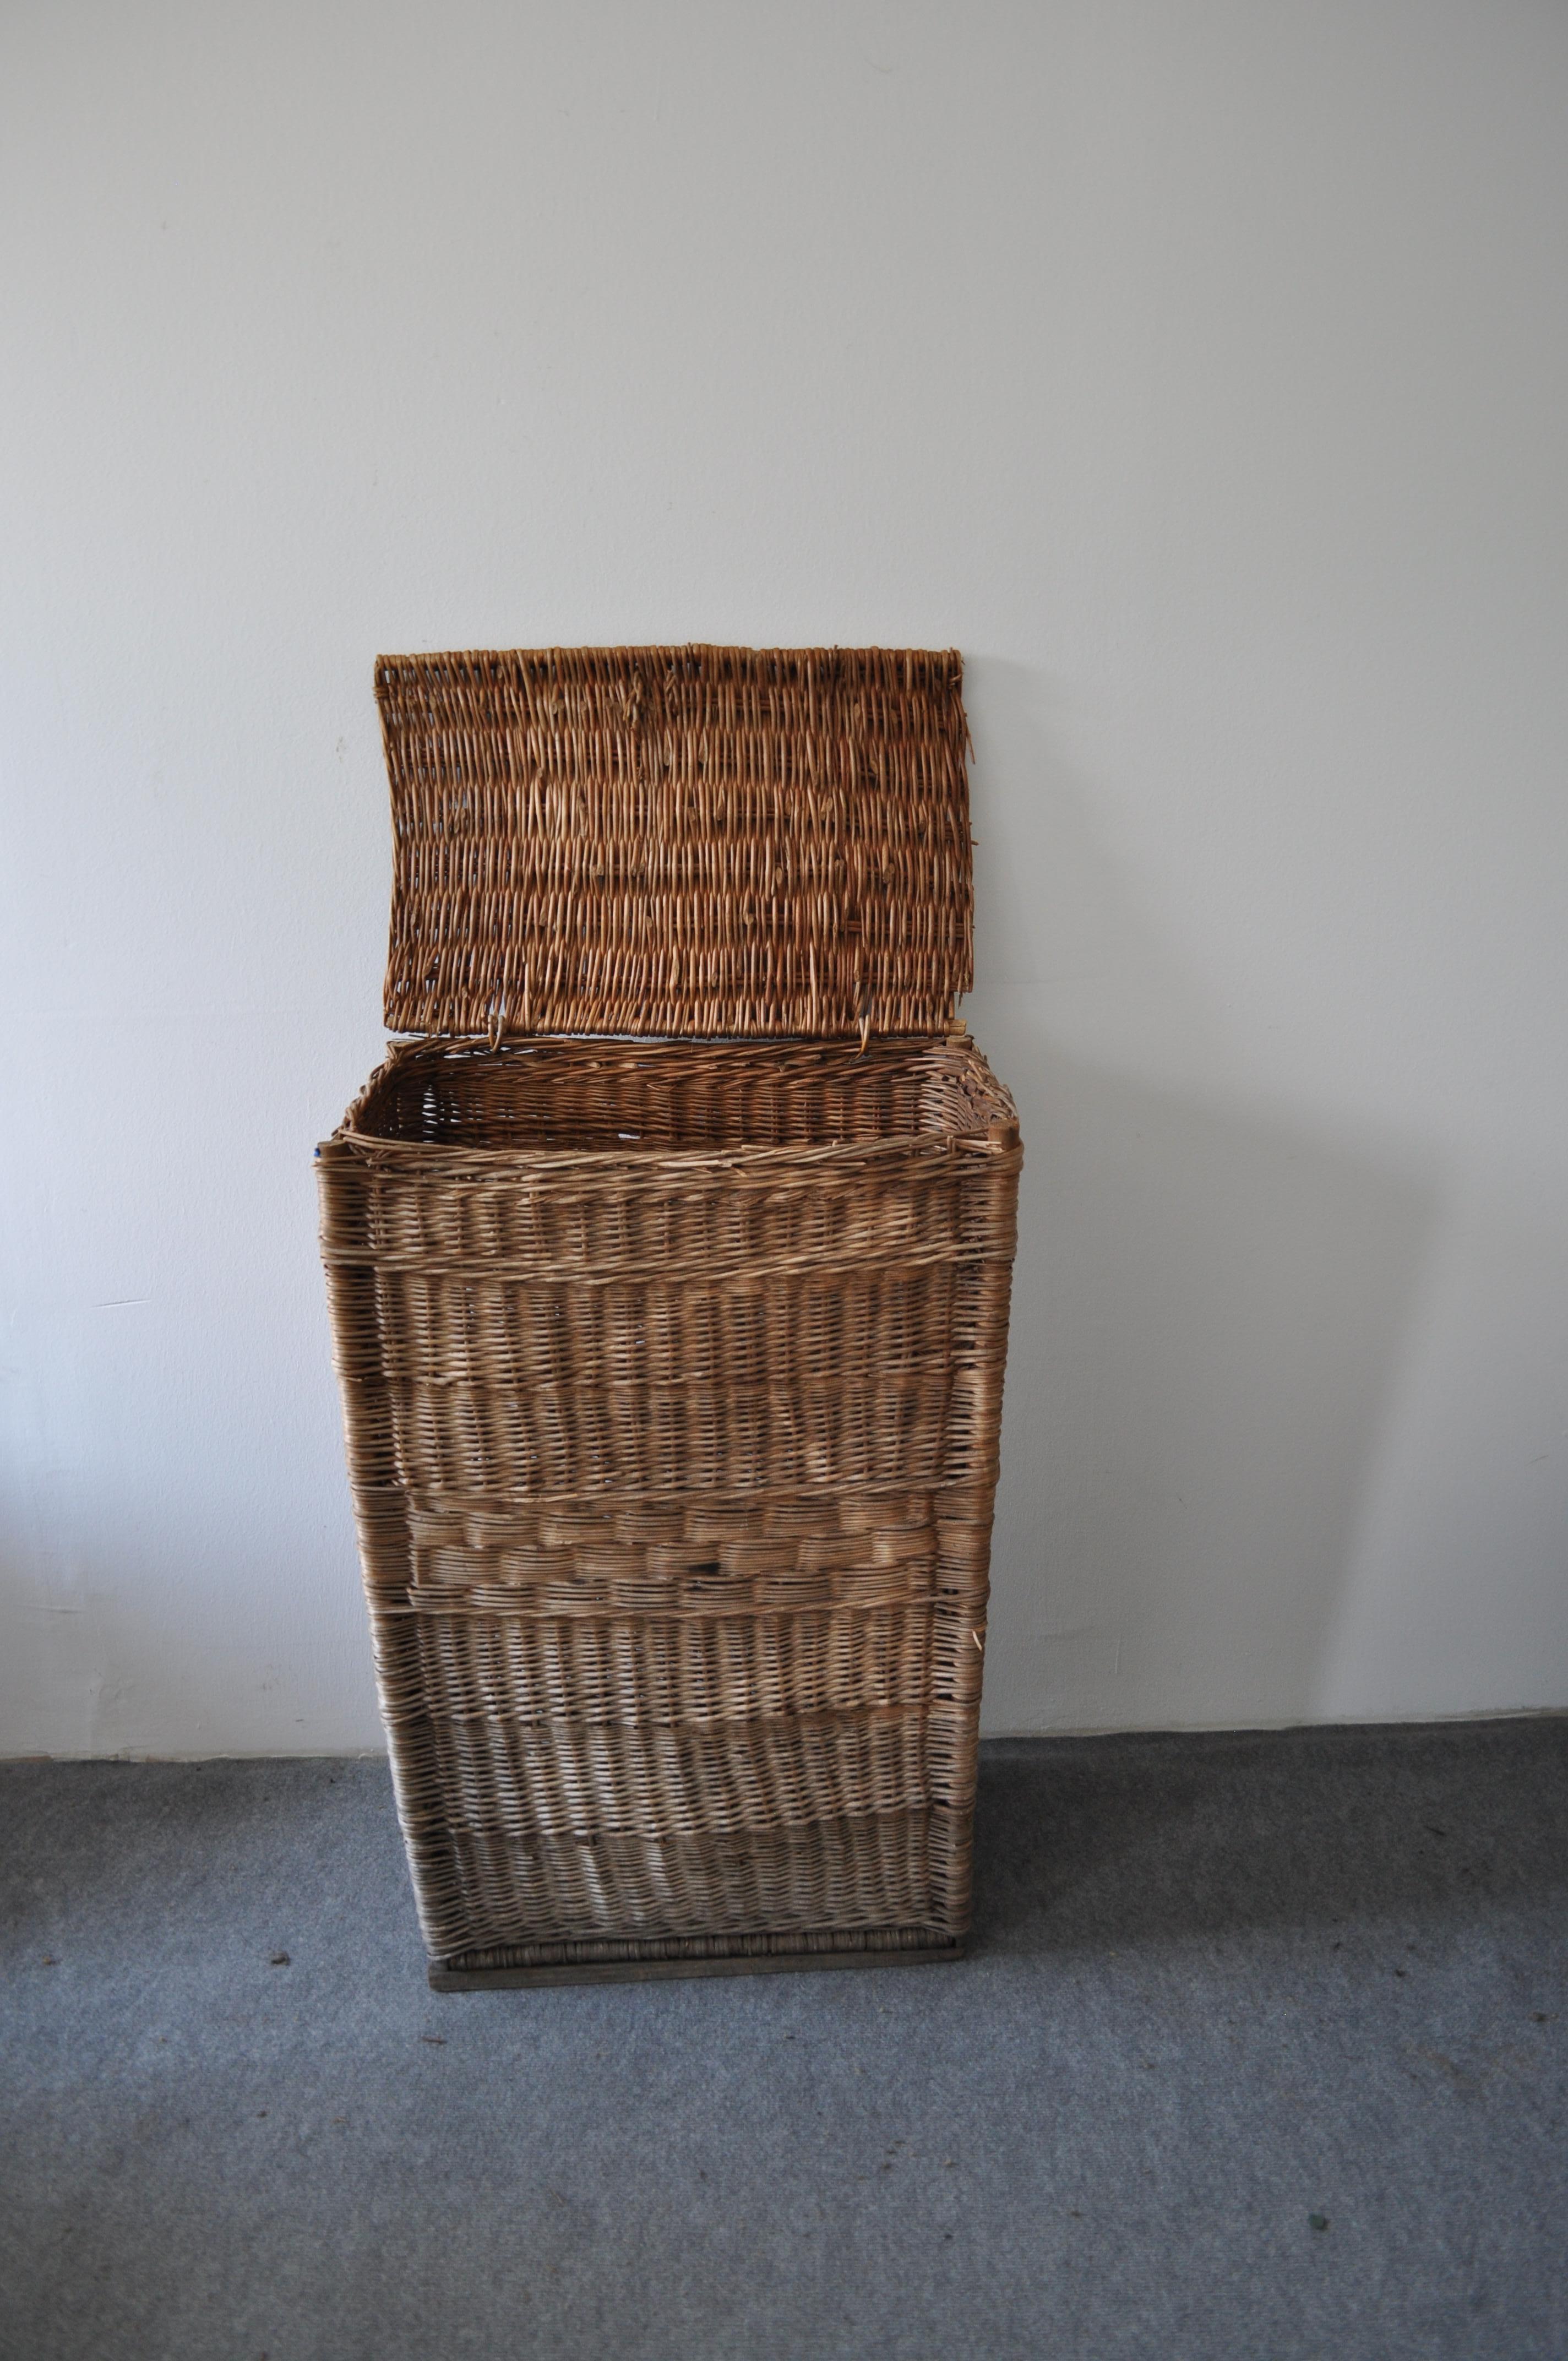 Large antique handmade wicker farmhouse basket found in Hungary.